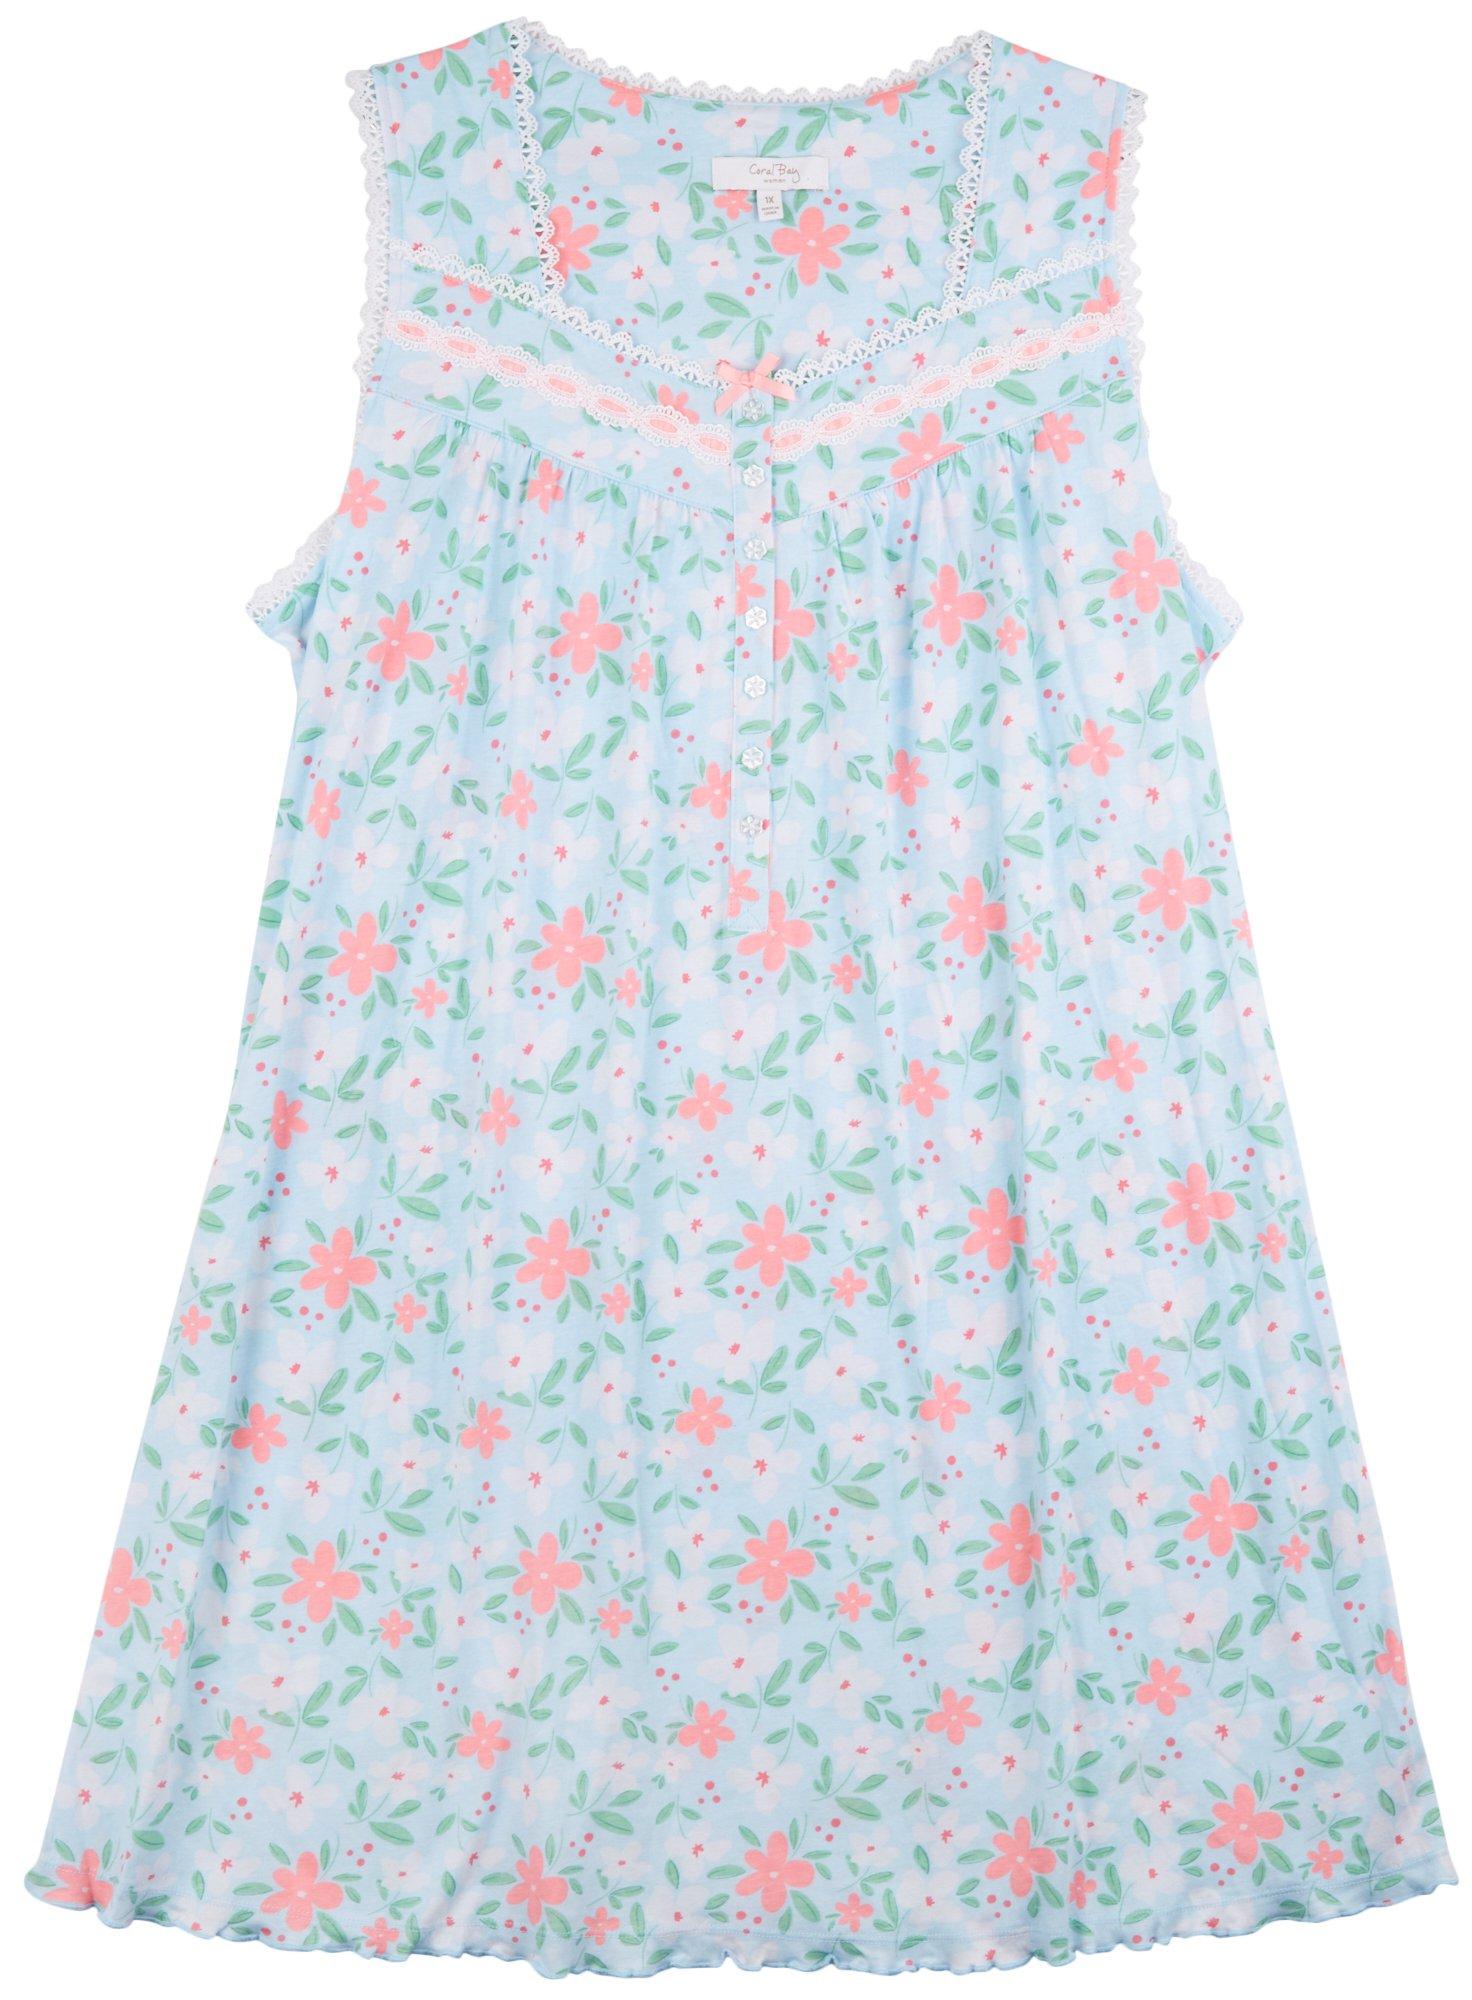 Plus 36 in. Floral Lace 100% Cotton Nightgown